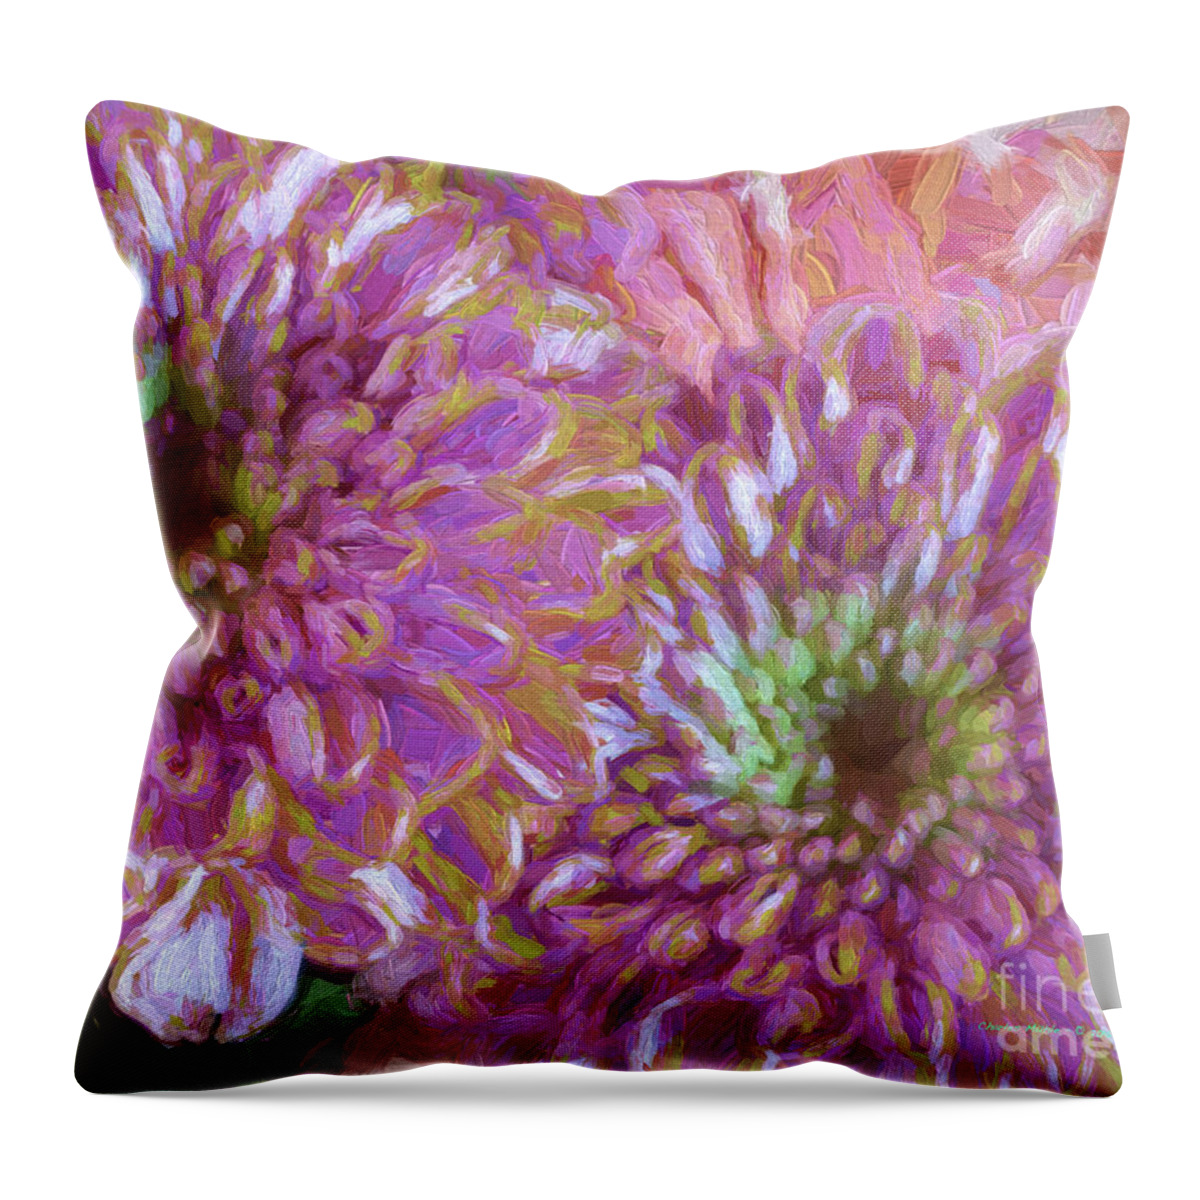 Santafe Throw Pillow featuring the painting Two Mums by Charles Muhle